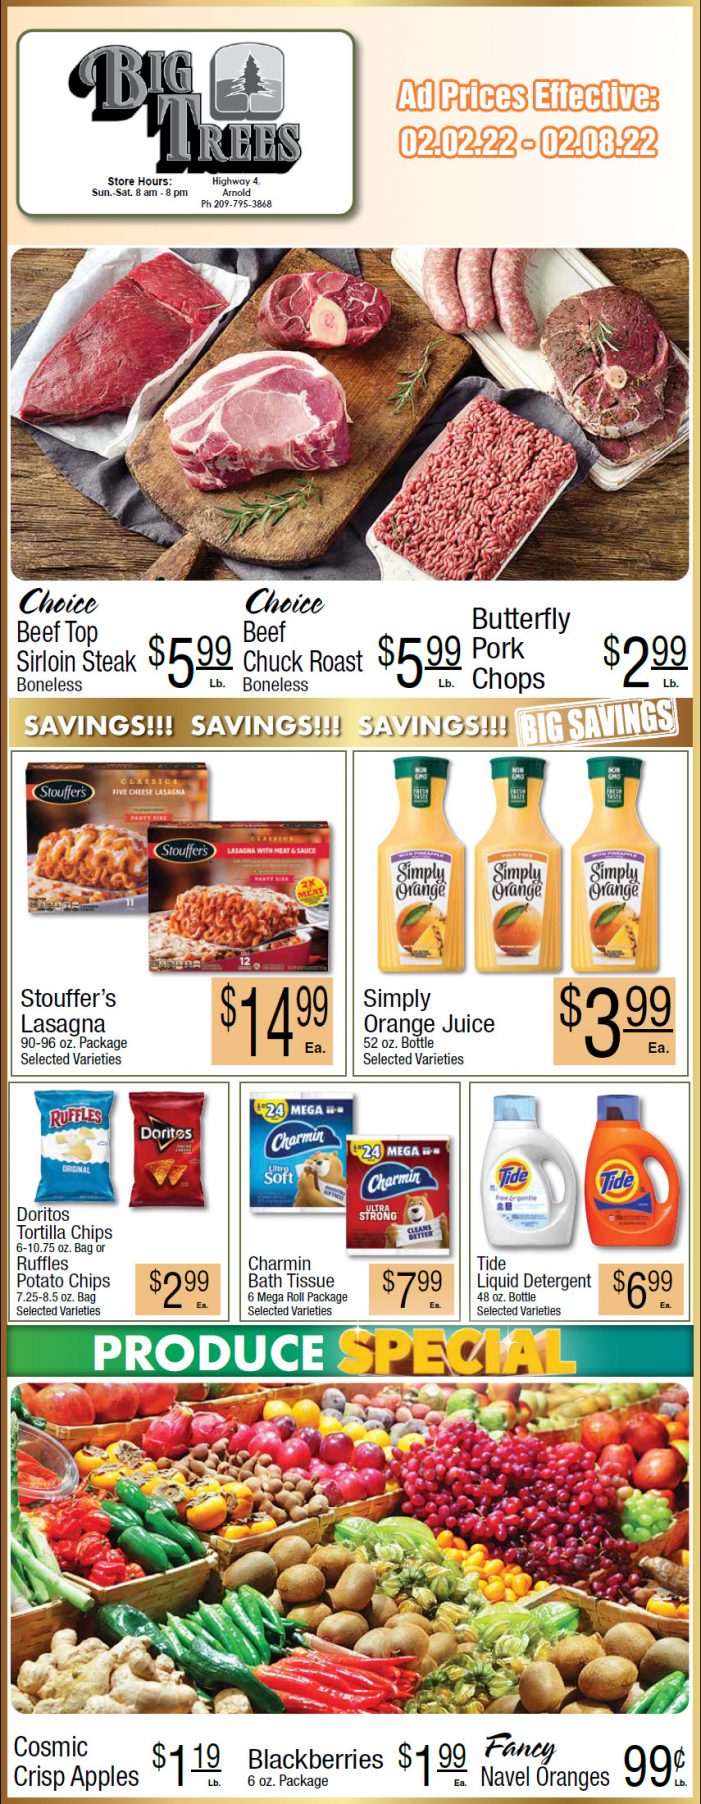 Big Trees Market Weekly Ad & Grocery Specials February 2nd Through The 8th! Shop Local & Save!